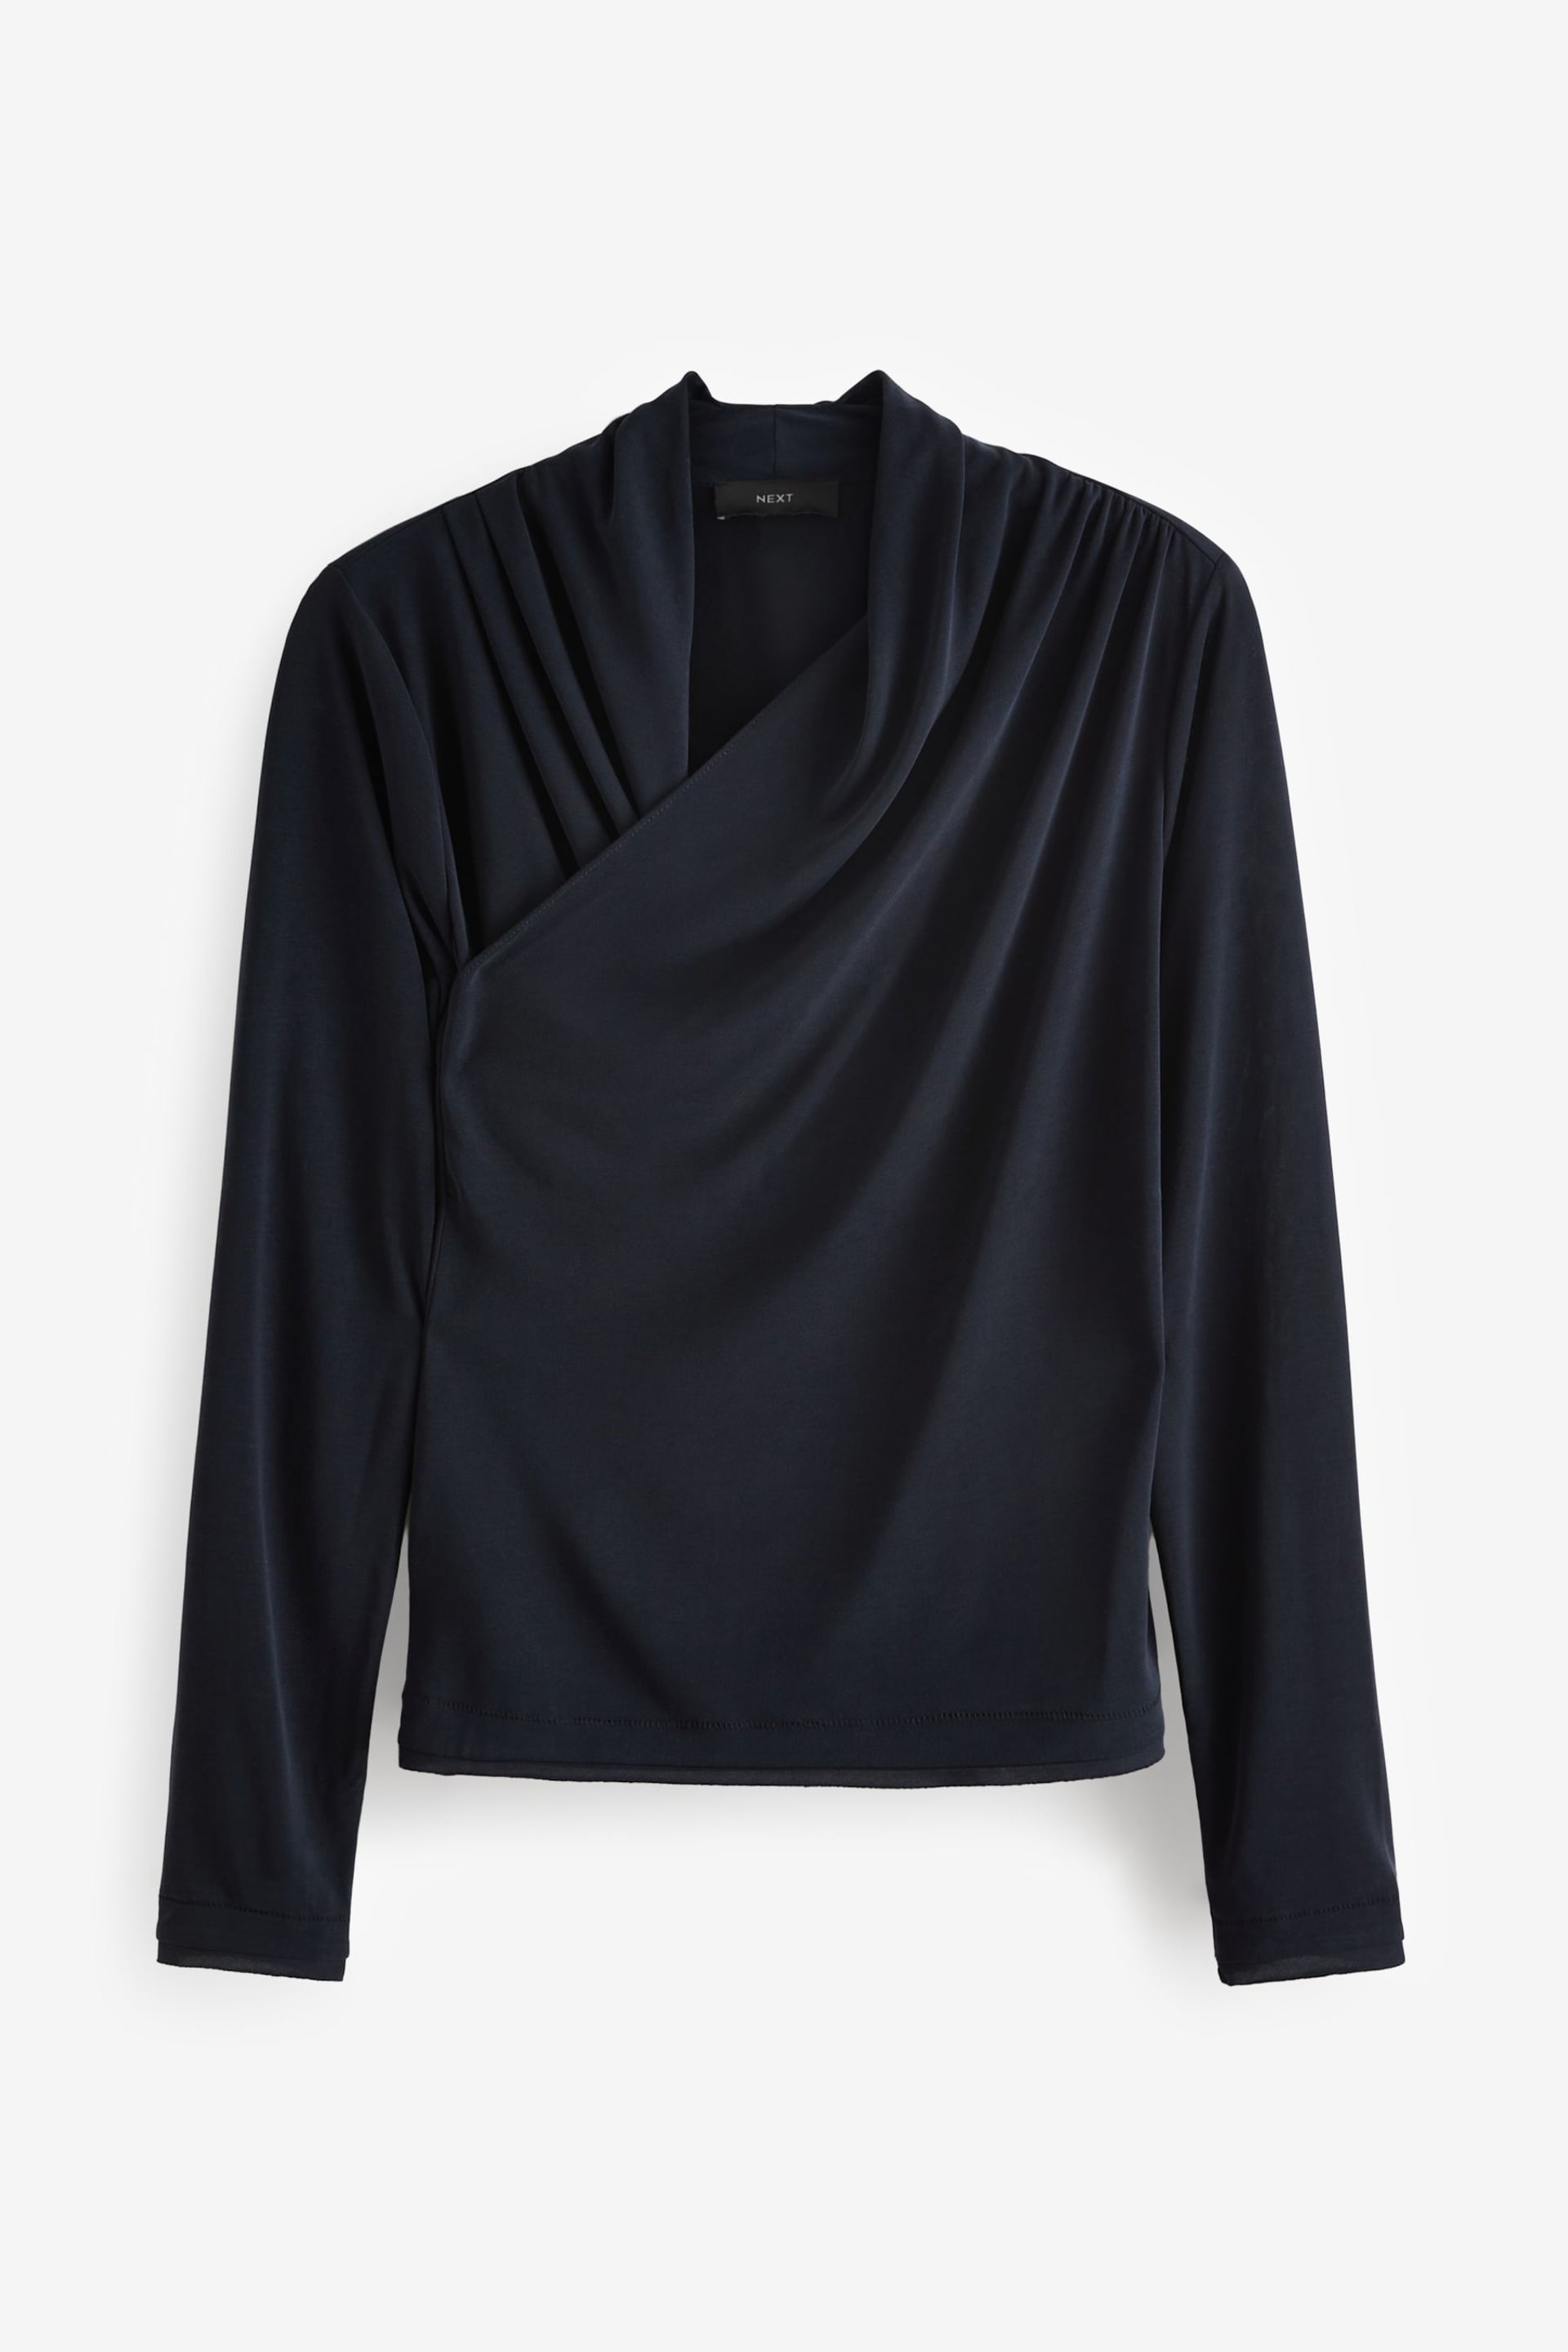 Navy Blue Wrap Neck Modal Rich Long Sleeve Top - Image 5 of 6